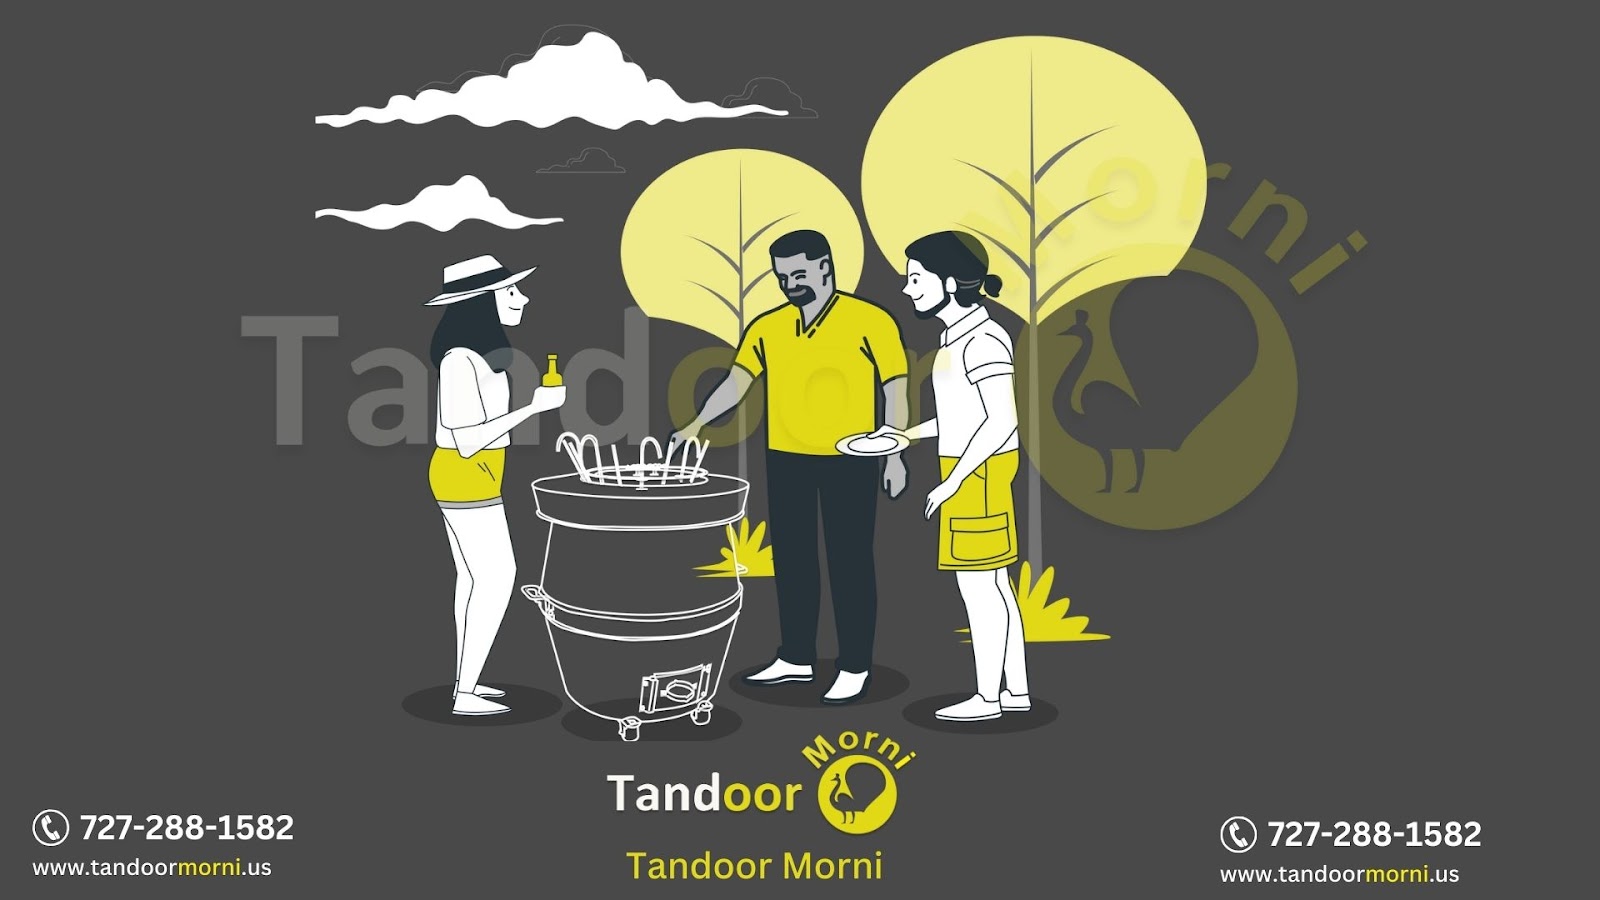 In the pictures, individuals can be seen enjoying an outdoor tandoor oven. If you're looking for a tandoor for sale in New York and appreciate them, get one right now.